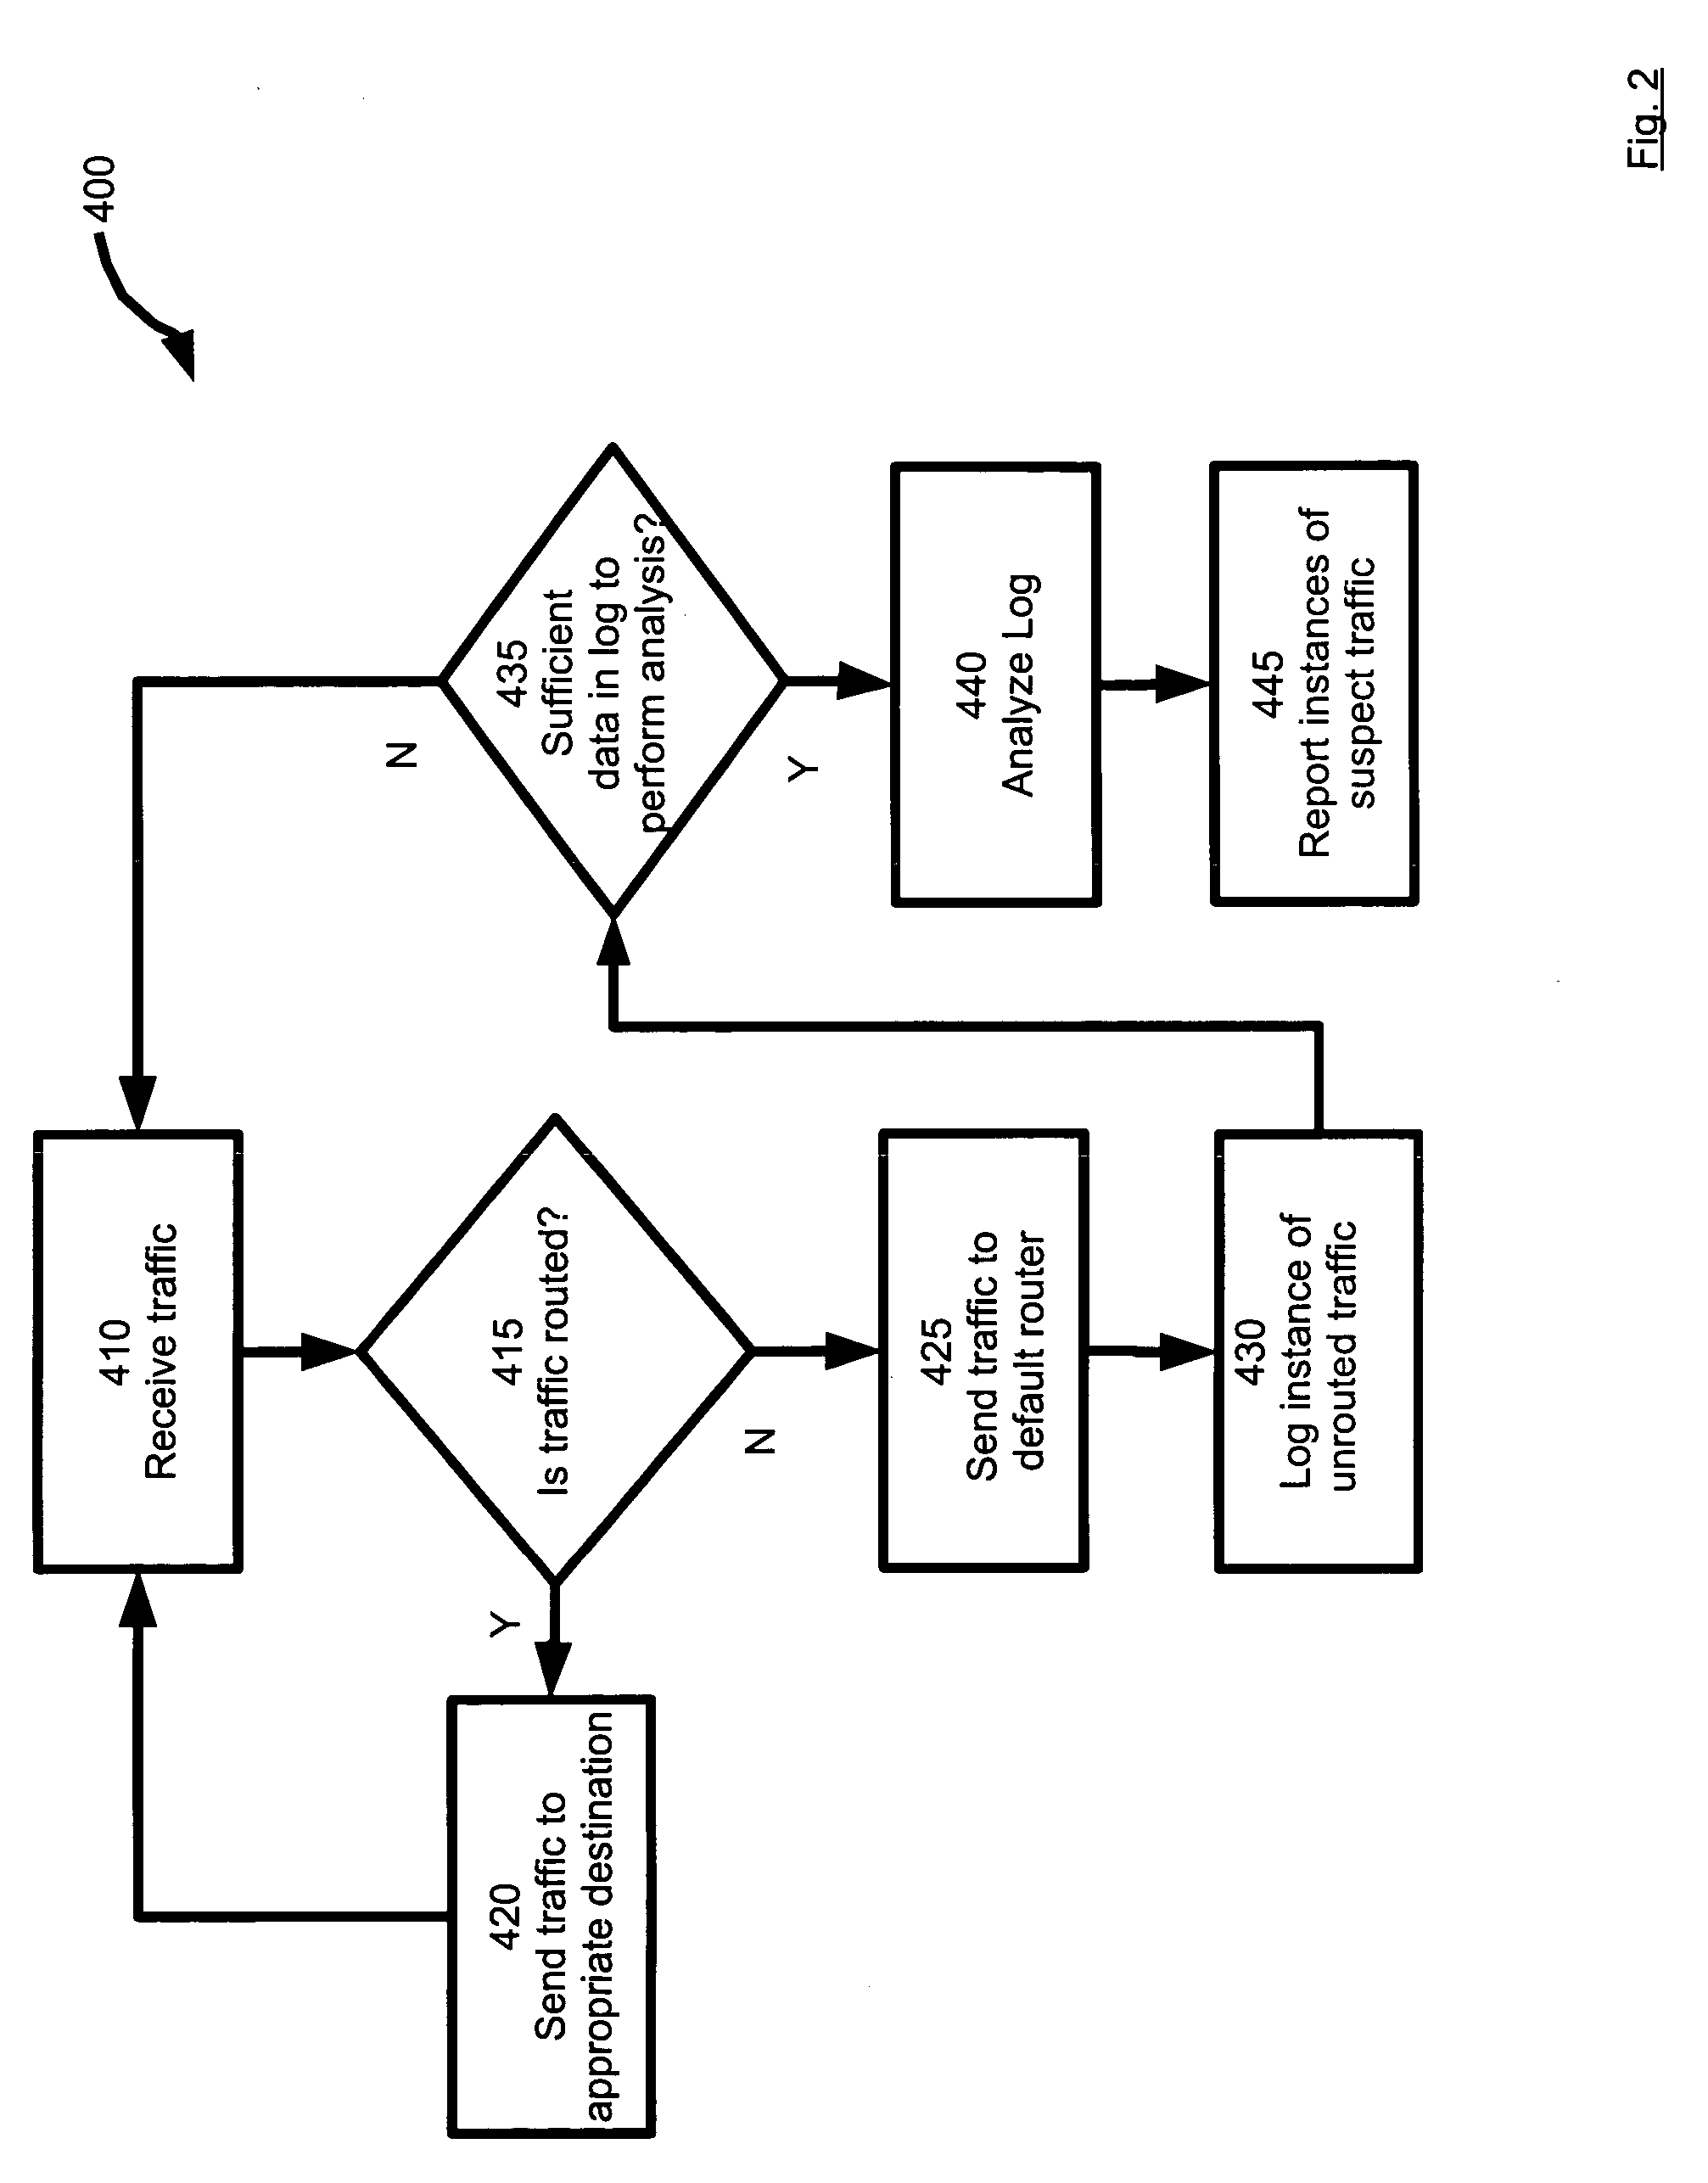 System and method for traffic analysis